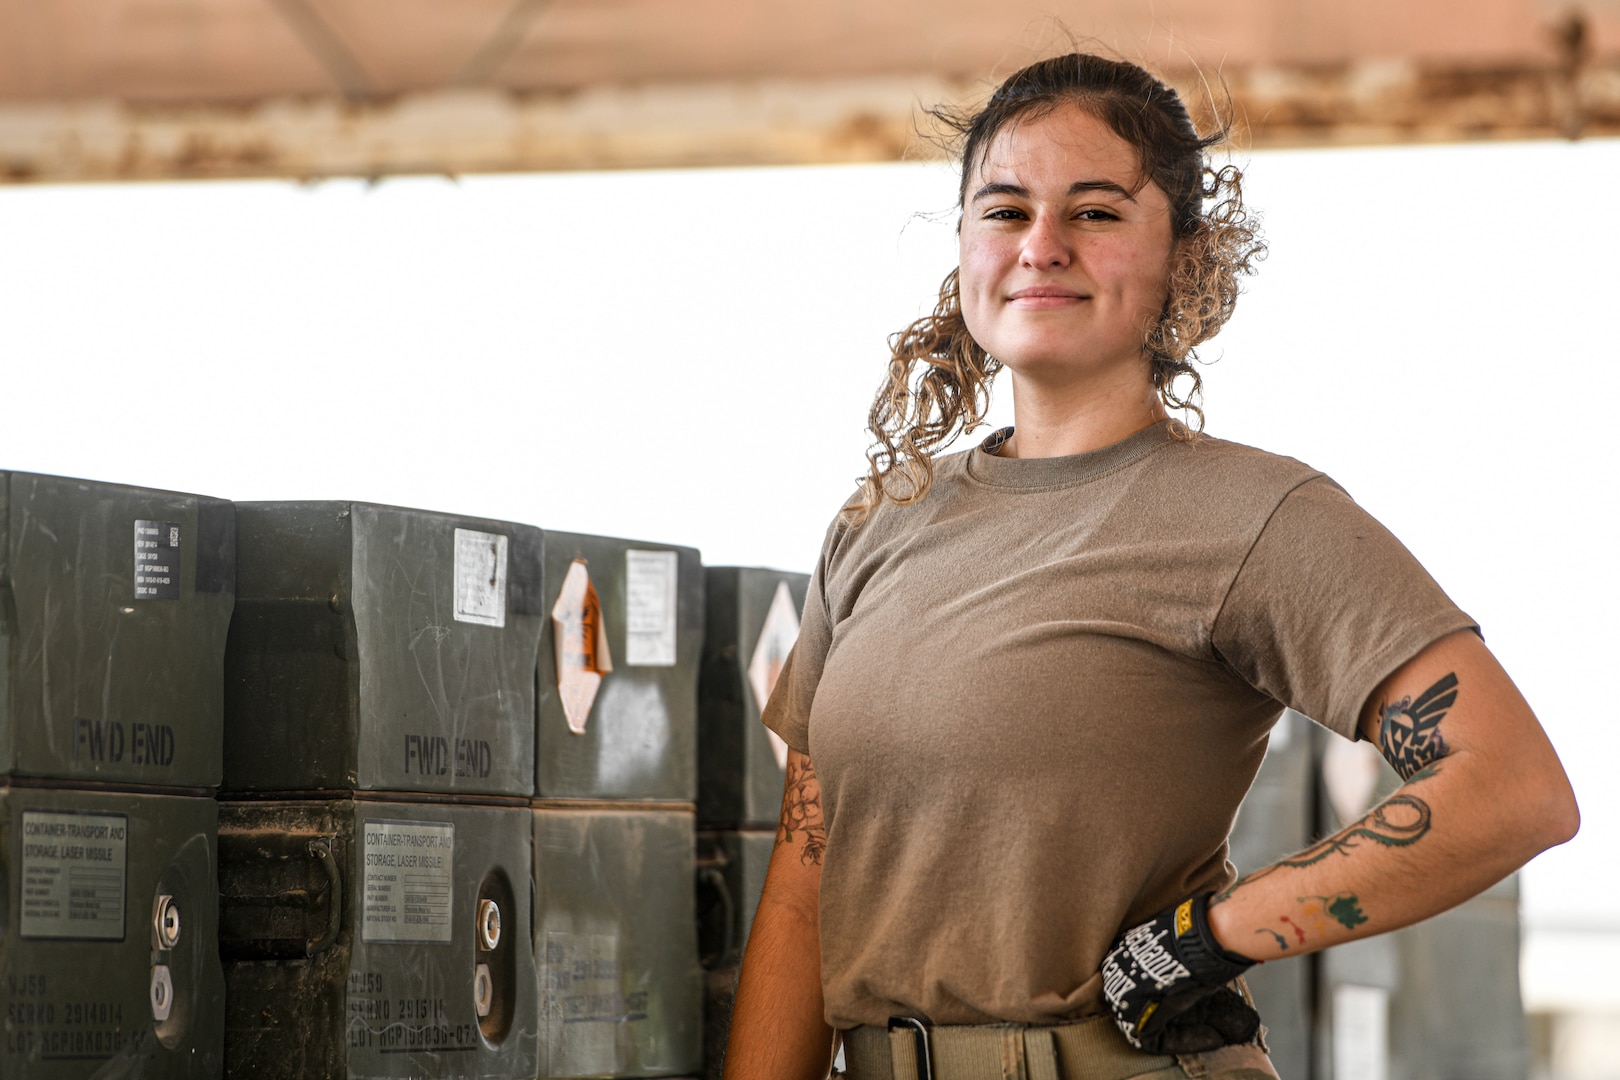 Senior Airman Jennifer Alvarenga, a munitions control specialist assigned to the 380th Expeditionary Maintenance Squadron, is a first generation, Salvadorian/American. Alvarenga says that finding friendships in those with similar experiences, gives her a sense of family away from family.